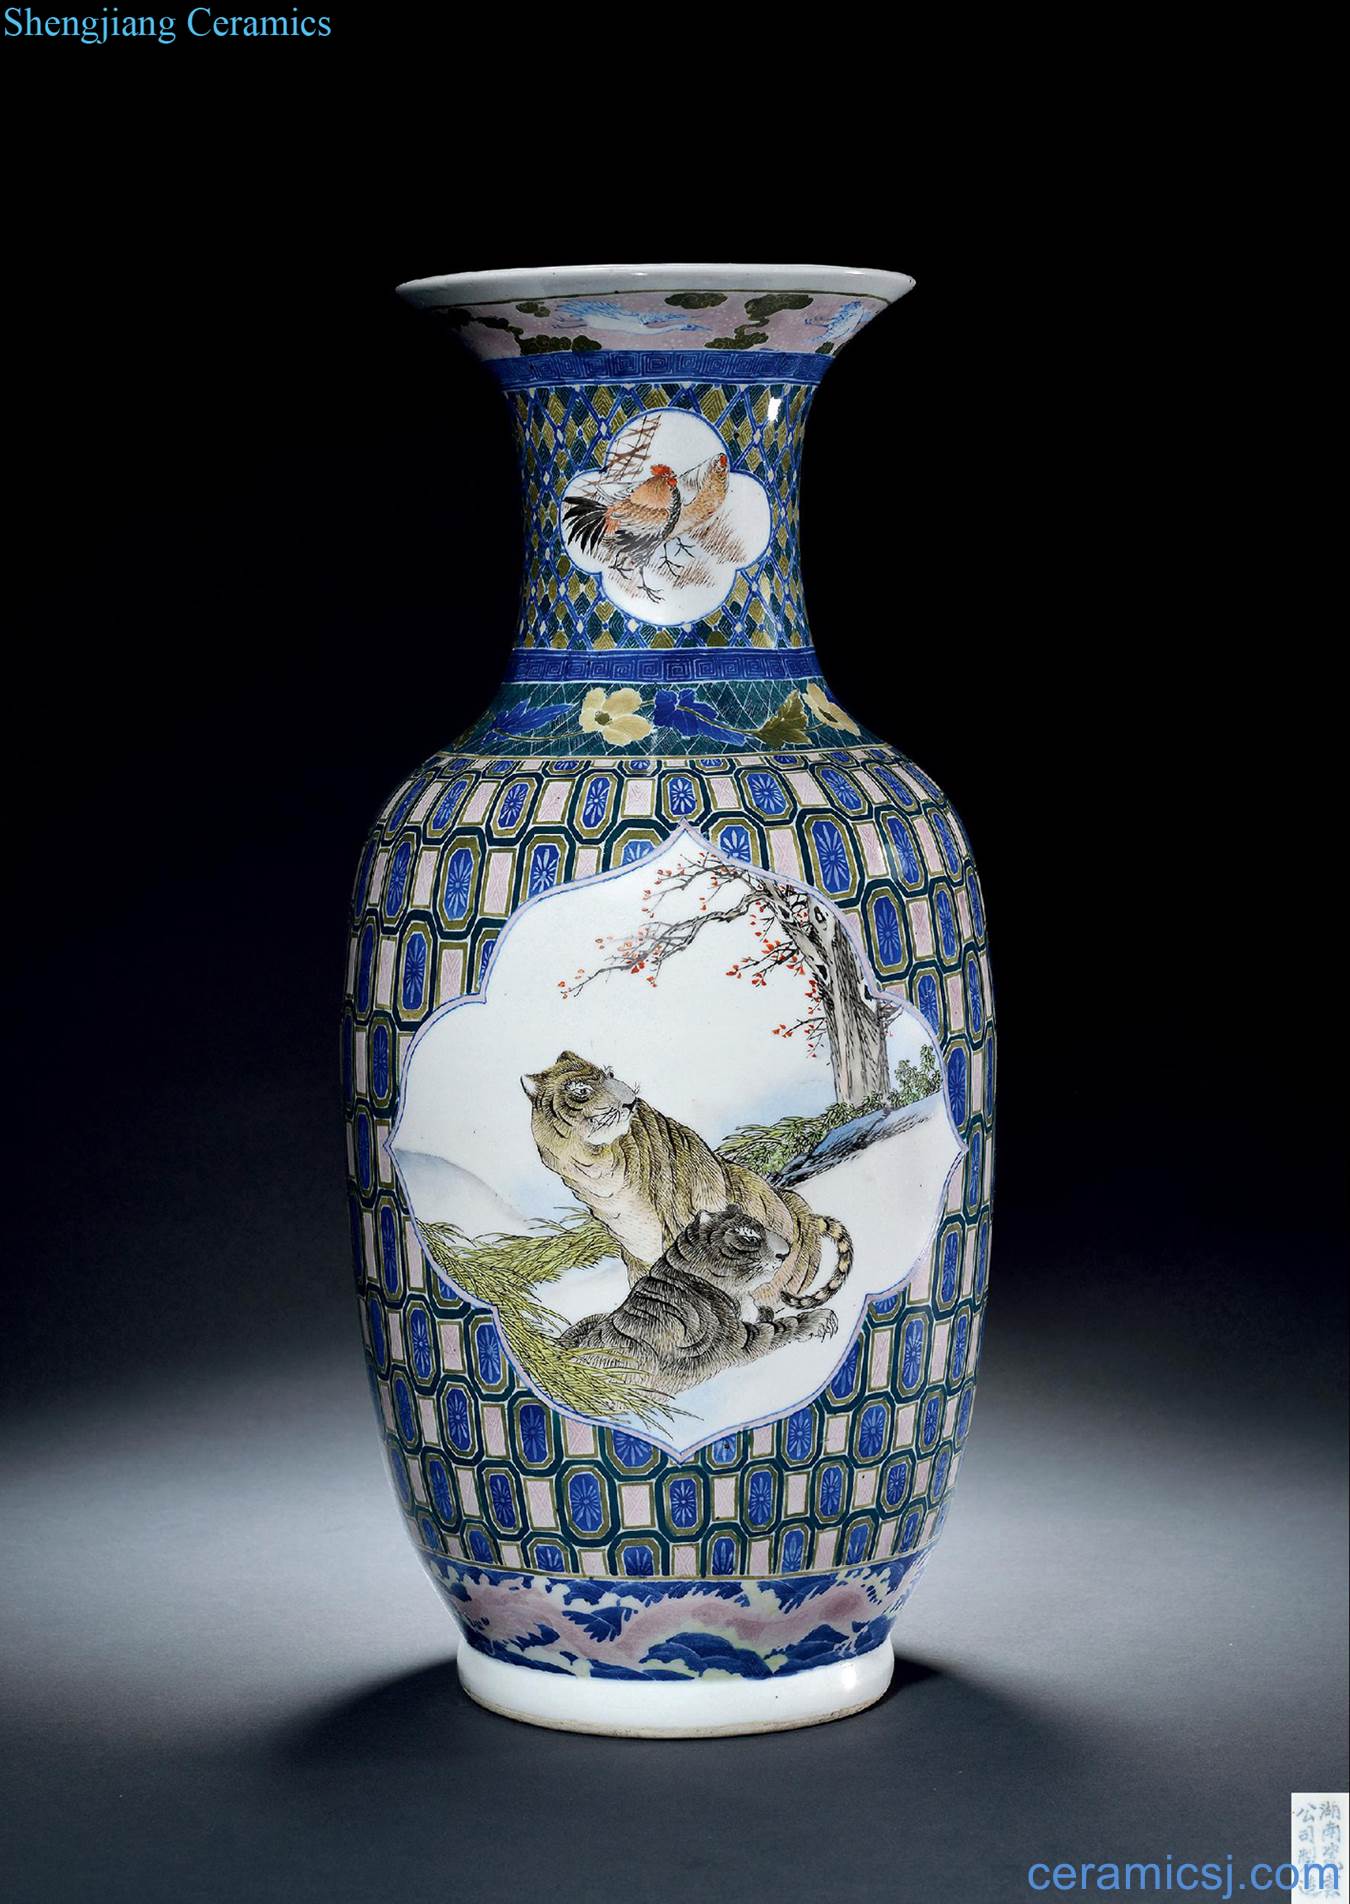 Qing guangxu Liling kiln glaze colorful medallion under two tigers on double the badger mouth bottle